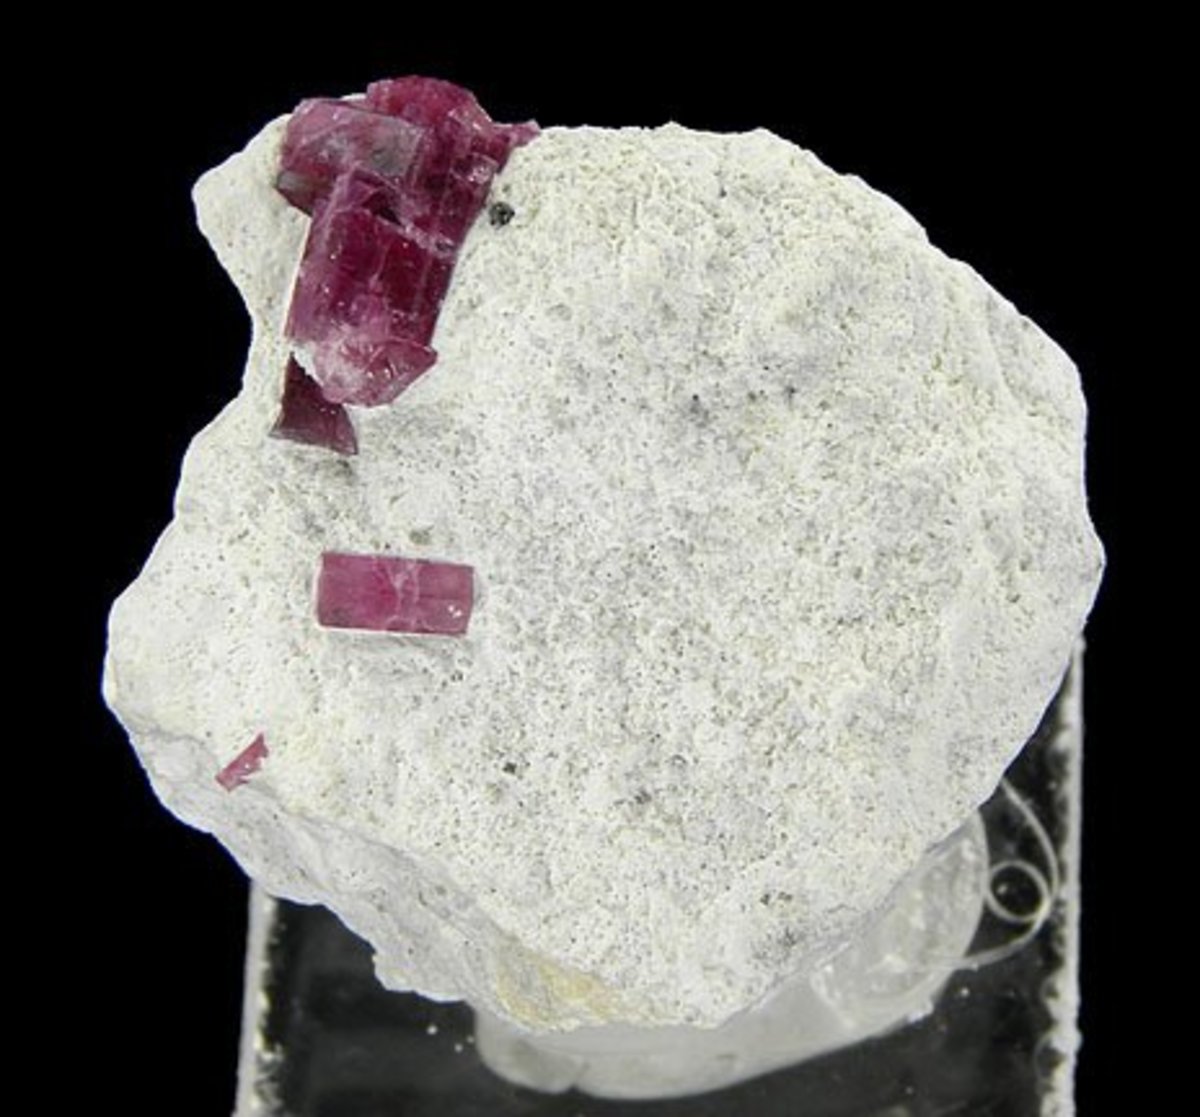 What are the Most Expensive Collectible Rocks & Minerals?